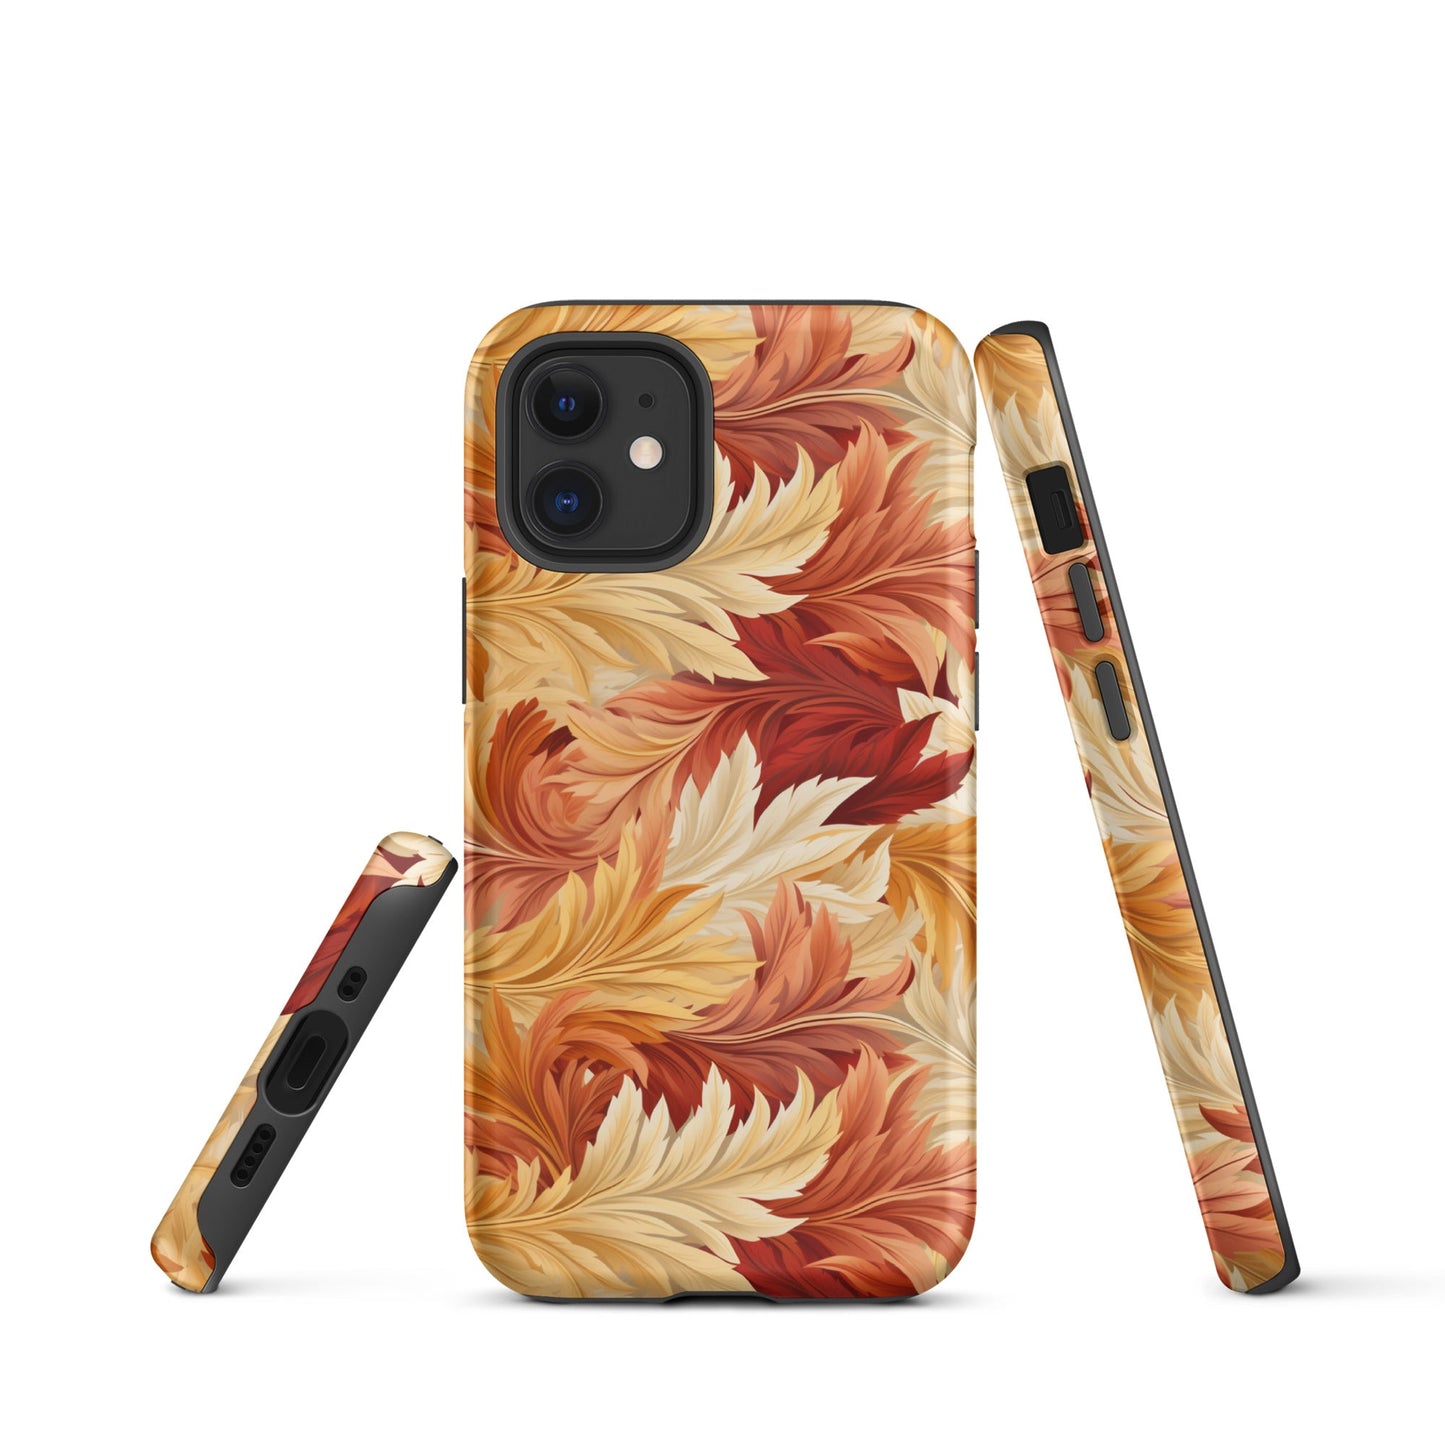 Feathered Foliage - Rococo-Inspired Autumn Patterns - iPhone Case - Pattern Symphony